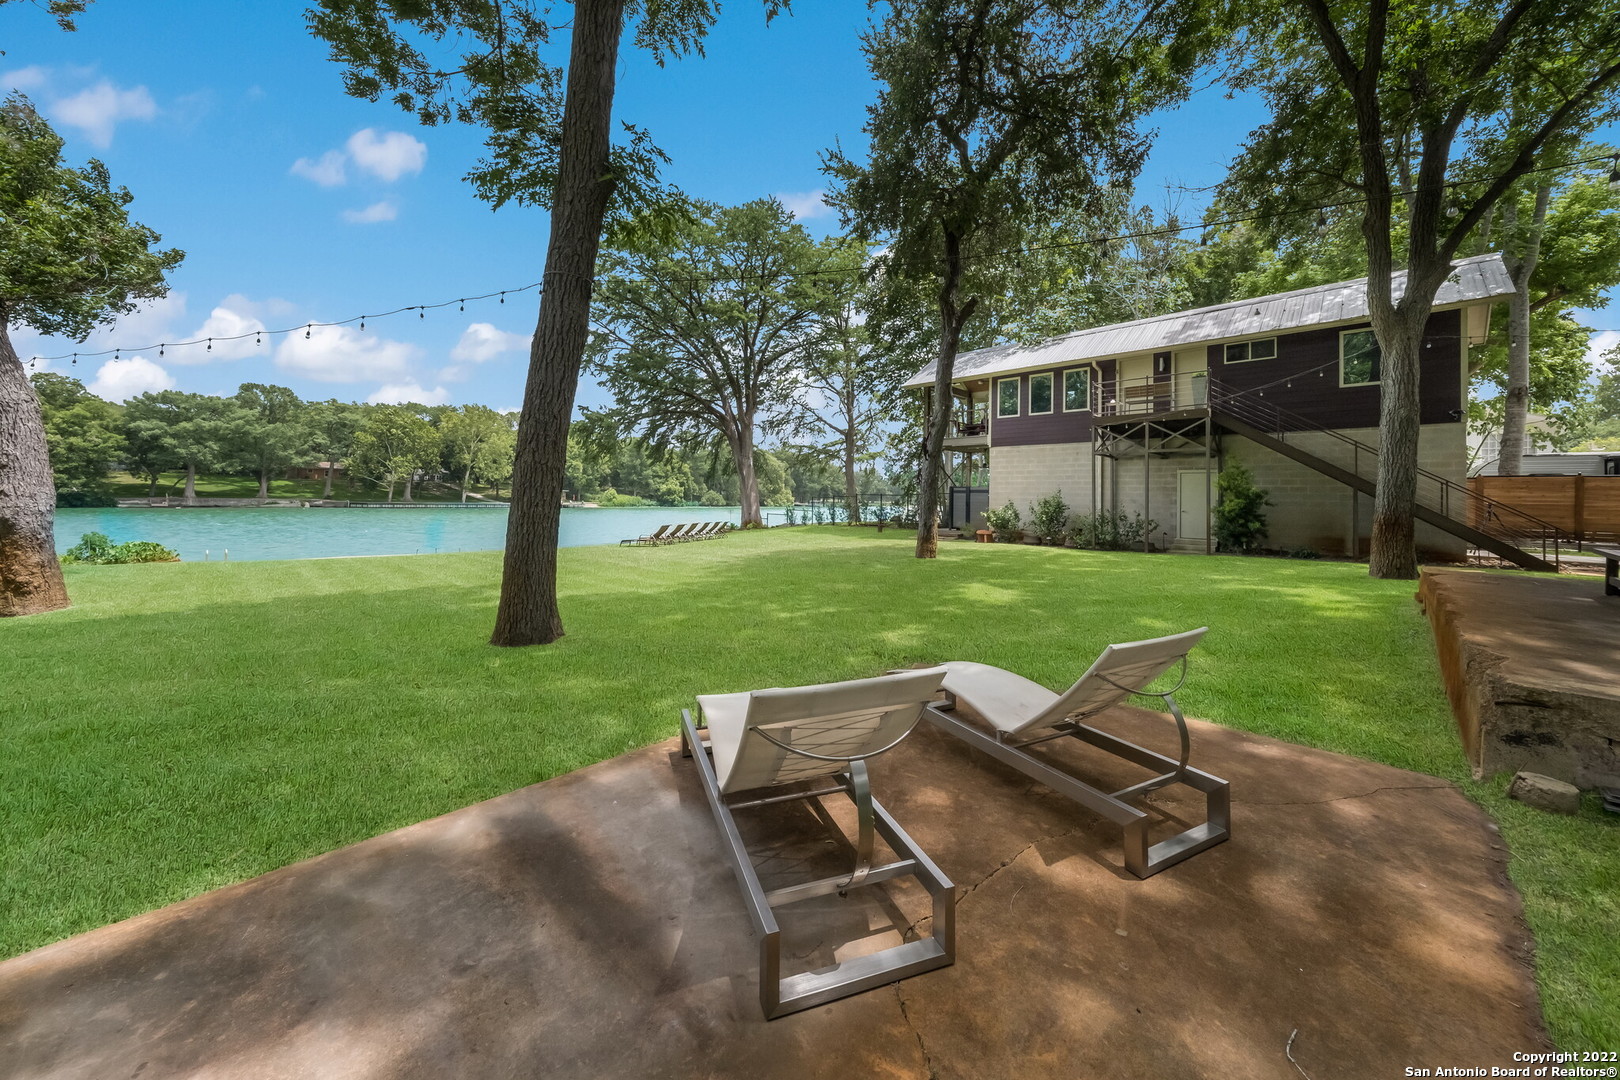 An entertainers dream and short-term rental friendly! Stunning custom home with 108' of Meadow Lake waterfrontage. Lakeside the 100' retaining wall/bulkhead has a sidewalk and aluminum dock ladder for easy access in and out of the water. Use the nearby neighborhood boat ramp and spend the day making sweet summertime memories and enjoying the great outdoors! Wash off in the private outdoor shower. Perimeter fencing and two 10' electric gates with a keypad at the property entry provide privacy and security and guests can conveniently enter the property through the pedestrian gate. The lawn is spacious, and the full-yard sprinkler system makes maintaining the beautiful green grass easy! Mature trees provide shade and special yard lighting creates a charming ambiance for lakeside dinners hosted on the oversized uncovered patio. Play your favorite dinner playlist through the built-in (inside/outside) sound system and use the wet bar to serve your guests! There are two covered patios - one upstairs and one down. Inside has the look and feel of a boutique-hotel with modern amenities, high-end fixtures, and a thoughtful design that takes every square foot into consideration. Feel the lake breeze with the specialty Low-E casement windows while you prepare dinner in the gorgeous kitchen! Fully equipped with all stainless-steel appliances like the Bosch chimney style hood and the built-in drawer style dishwasher and refrigerator. The stylish tempered-glass bar and specialty Spanish Porcelanosa tile feature wall are highlighted with the halogen recessed lights and tons of natural sunlight! The spa-like bathroom features an all-tile shower with a rain shower head and a Restoration Hardware vanity and medicine cabinet. The AC and wi-fi thermostat were installed in 2022 and the septic is large enough to accommodate four bathrooms and two kitchens. The oversized garage will fit a mid-size boat or RV and there is closed foam cell insulation under the house. No city taxes and the HOA is voluntary! Must see!